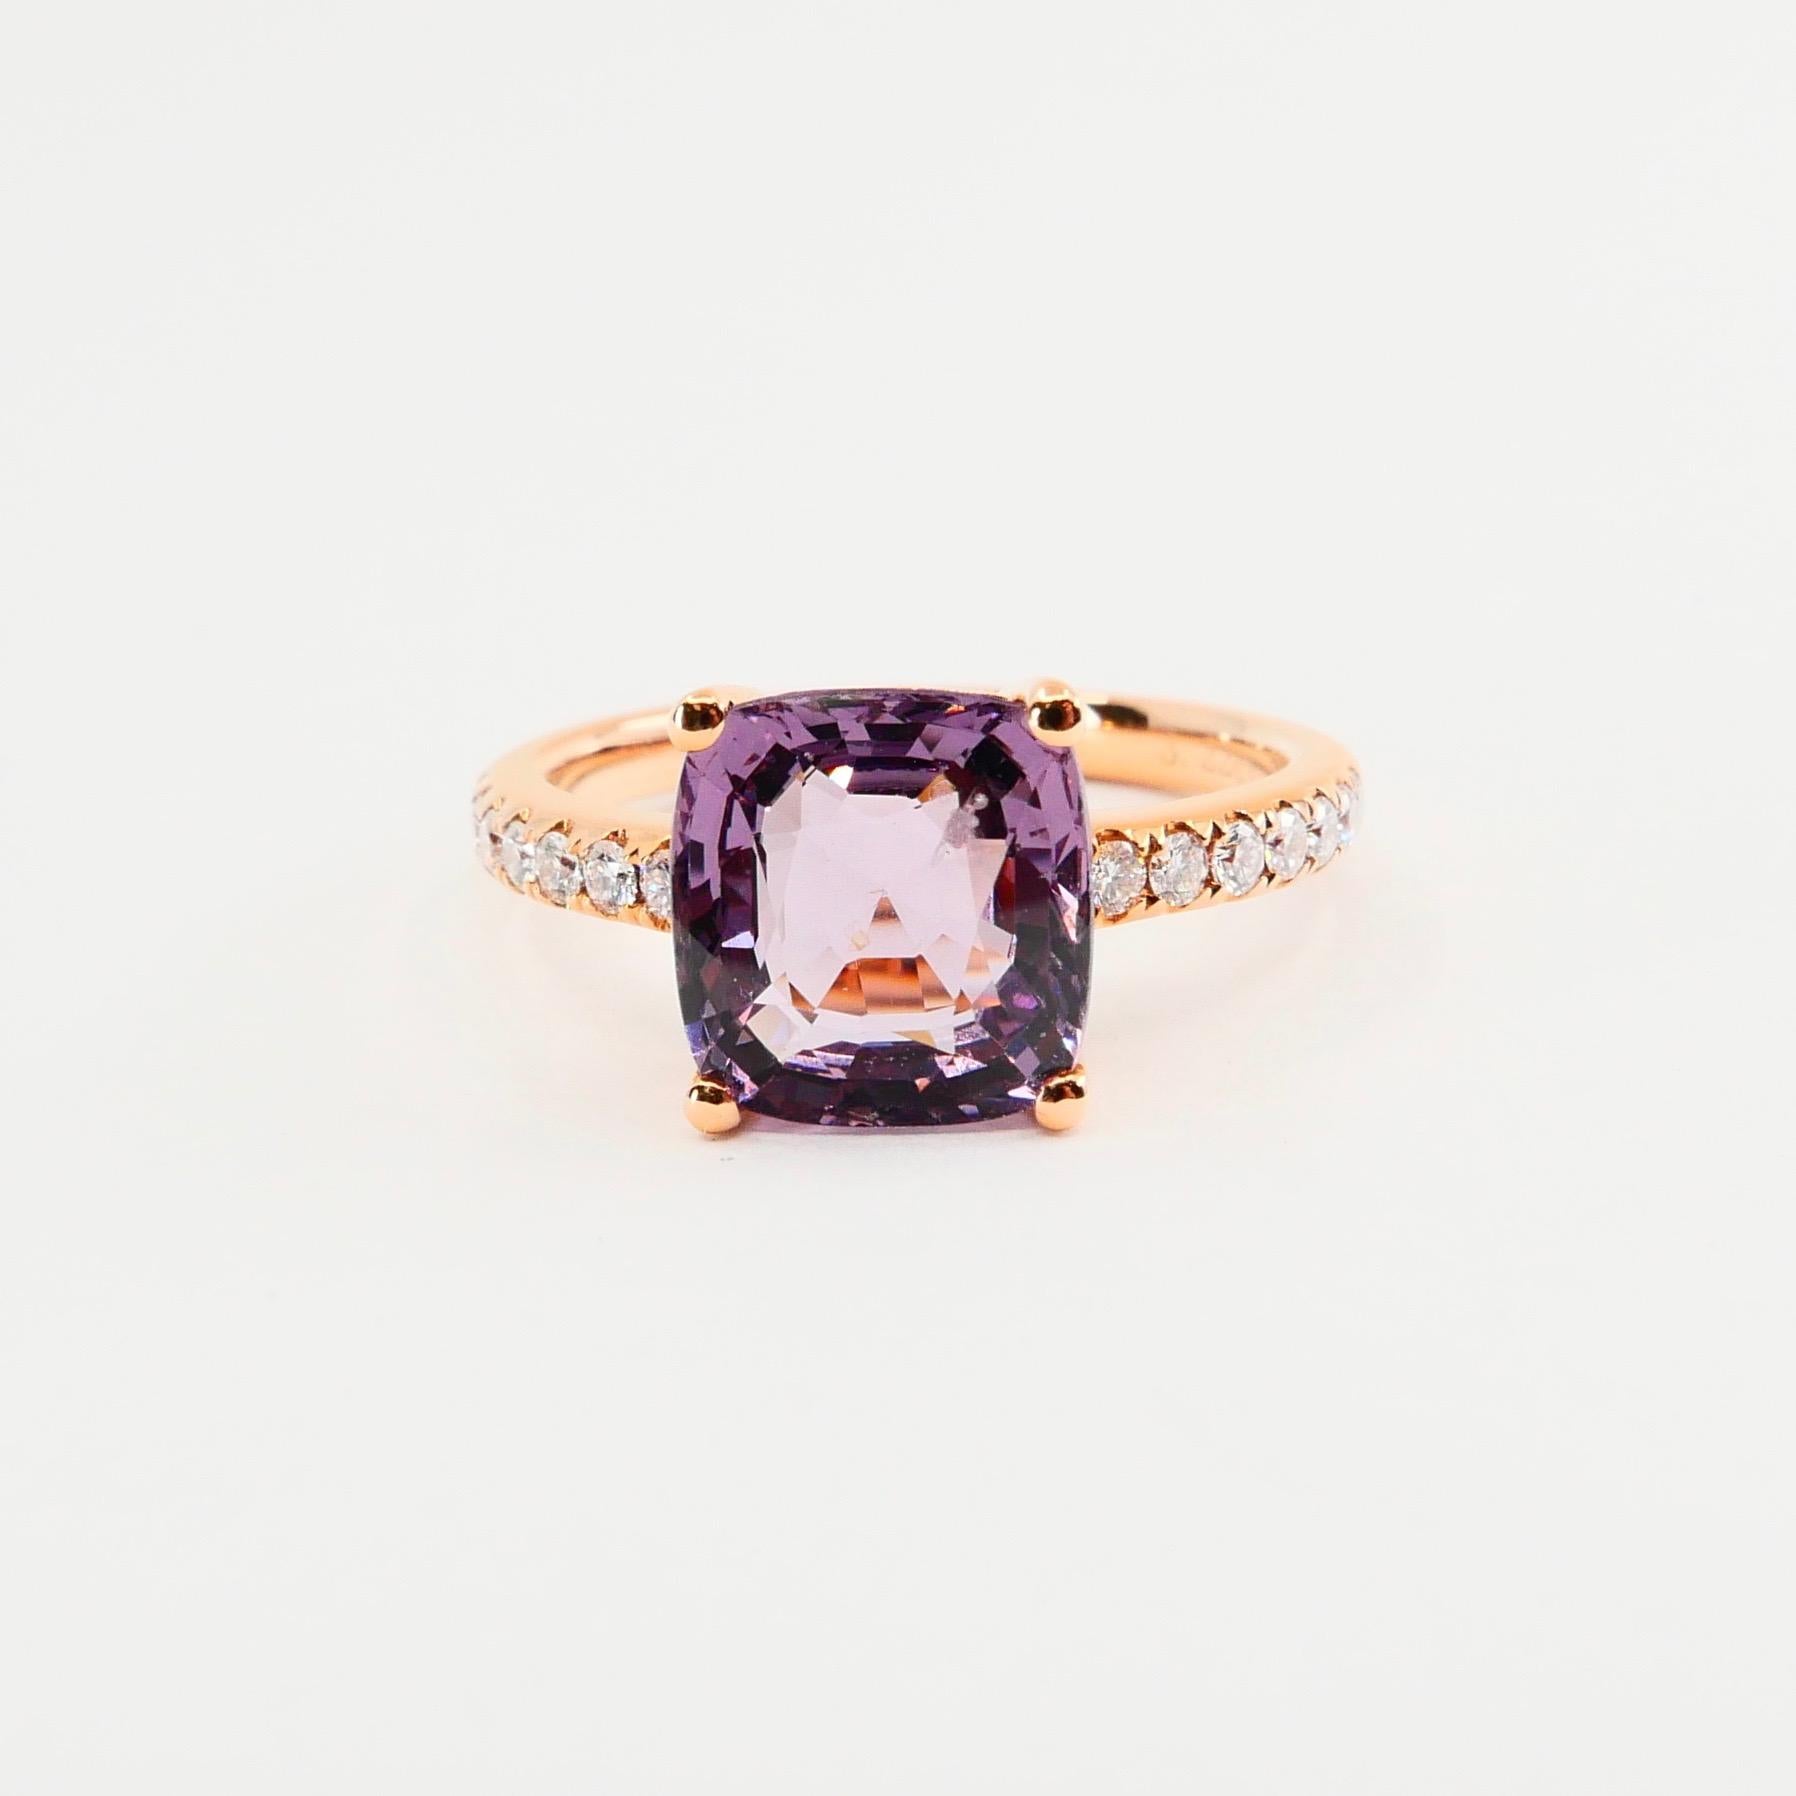 Cushion Cut Natural 3.22 Carat Purple Spinel and Diamond Ring Set in 18 Karat Rose Gold For Sale